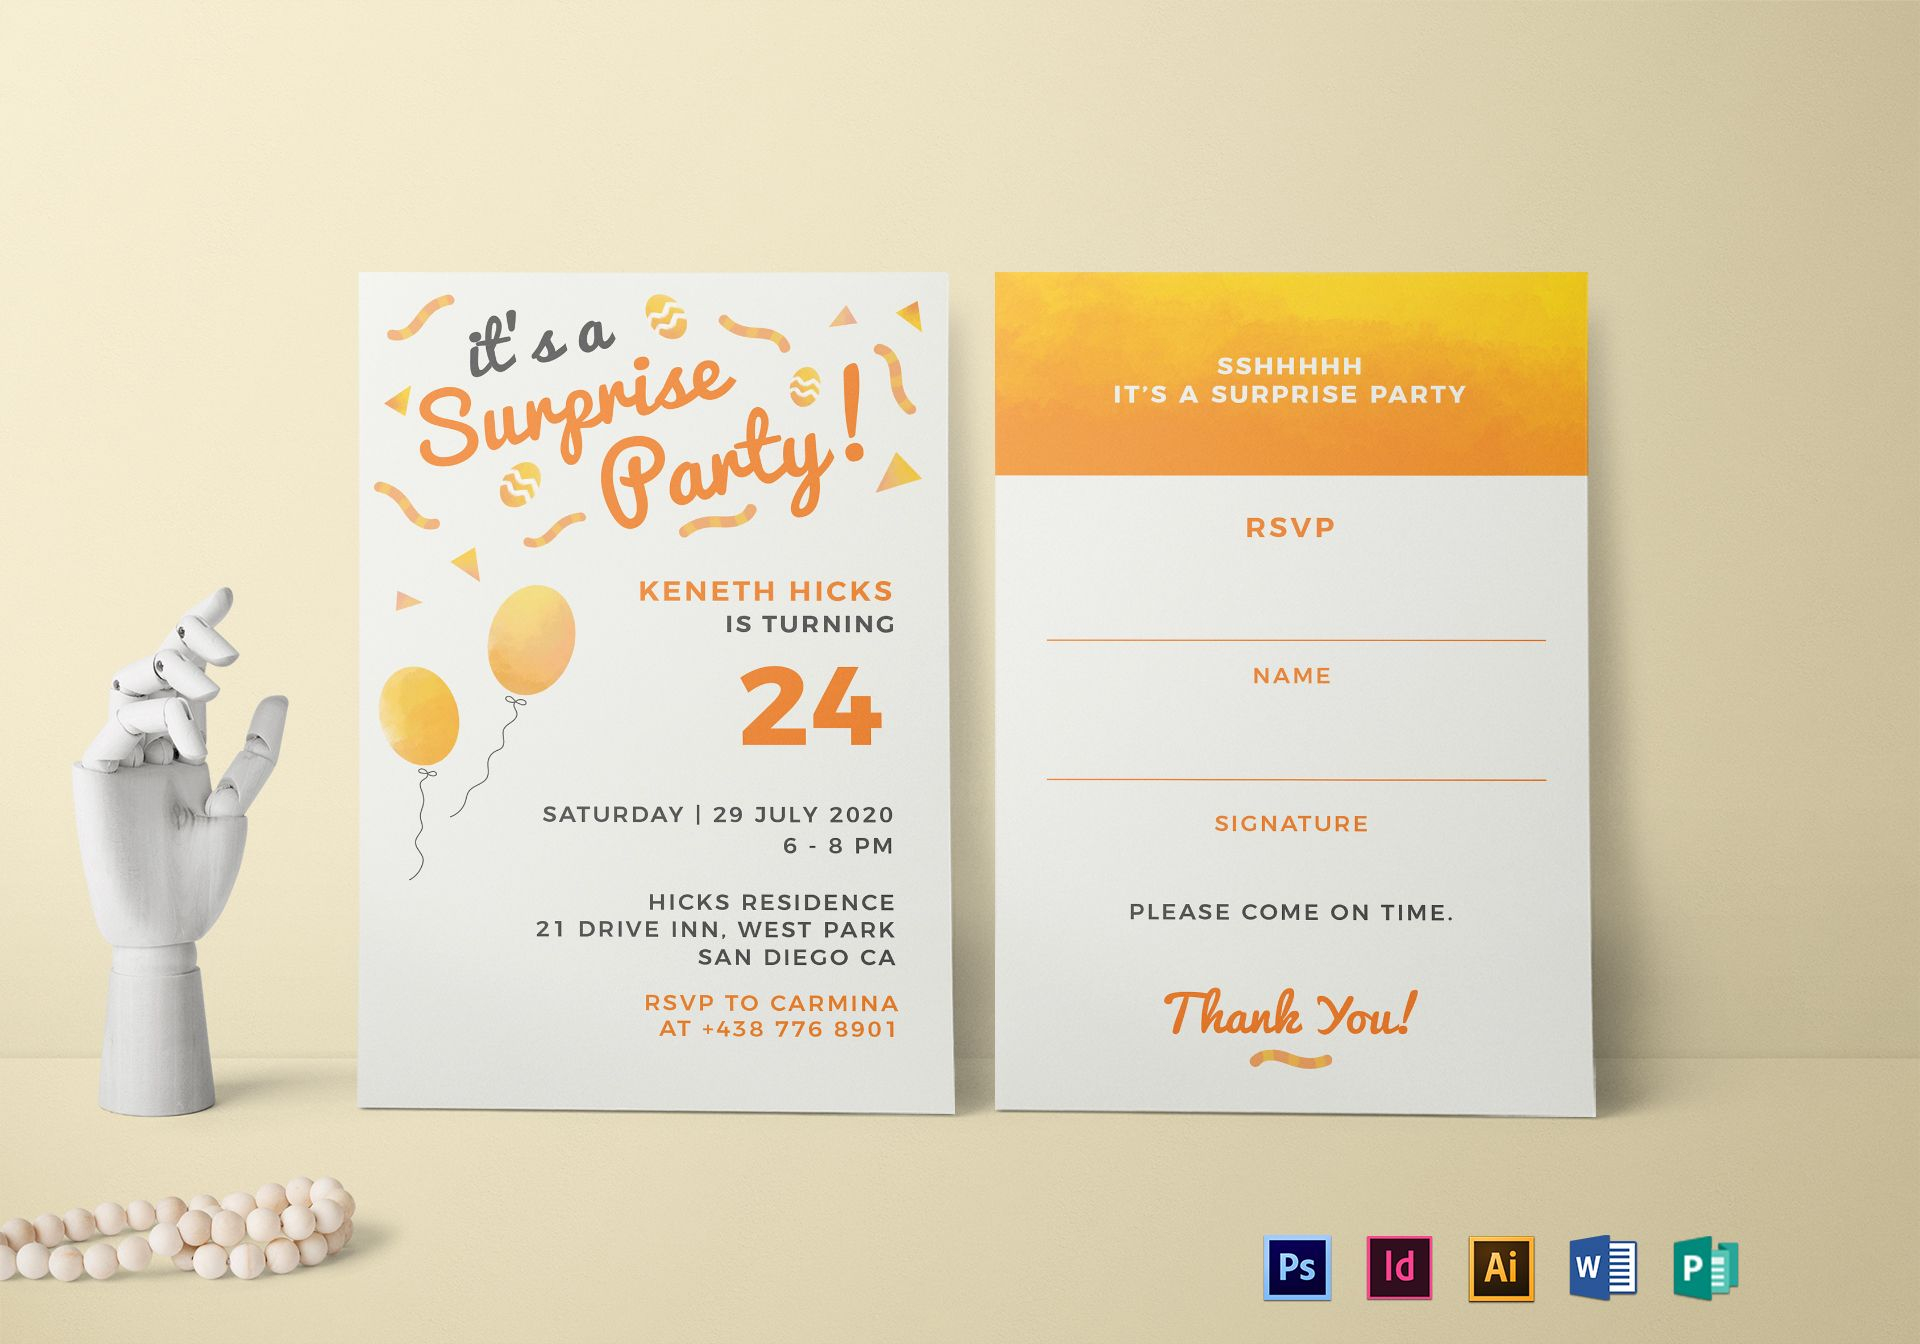 Invitation Card Ideas For Birthday Party 016 Birthday Party Invite Template Ideas Surprise Fearsome